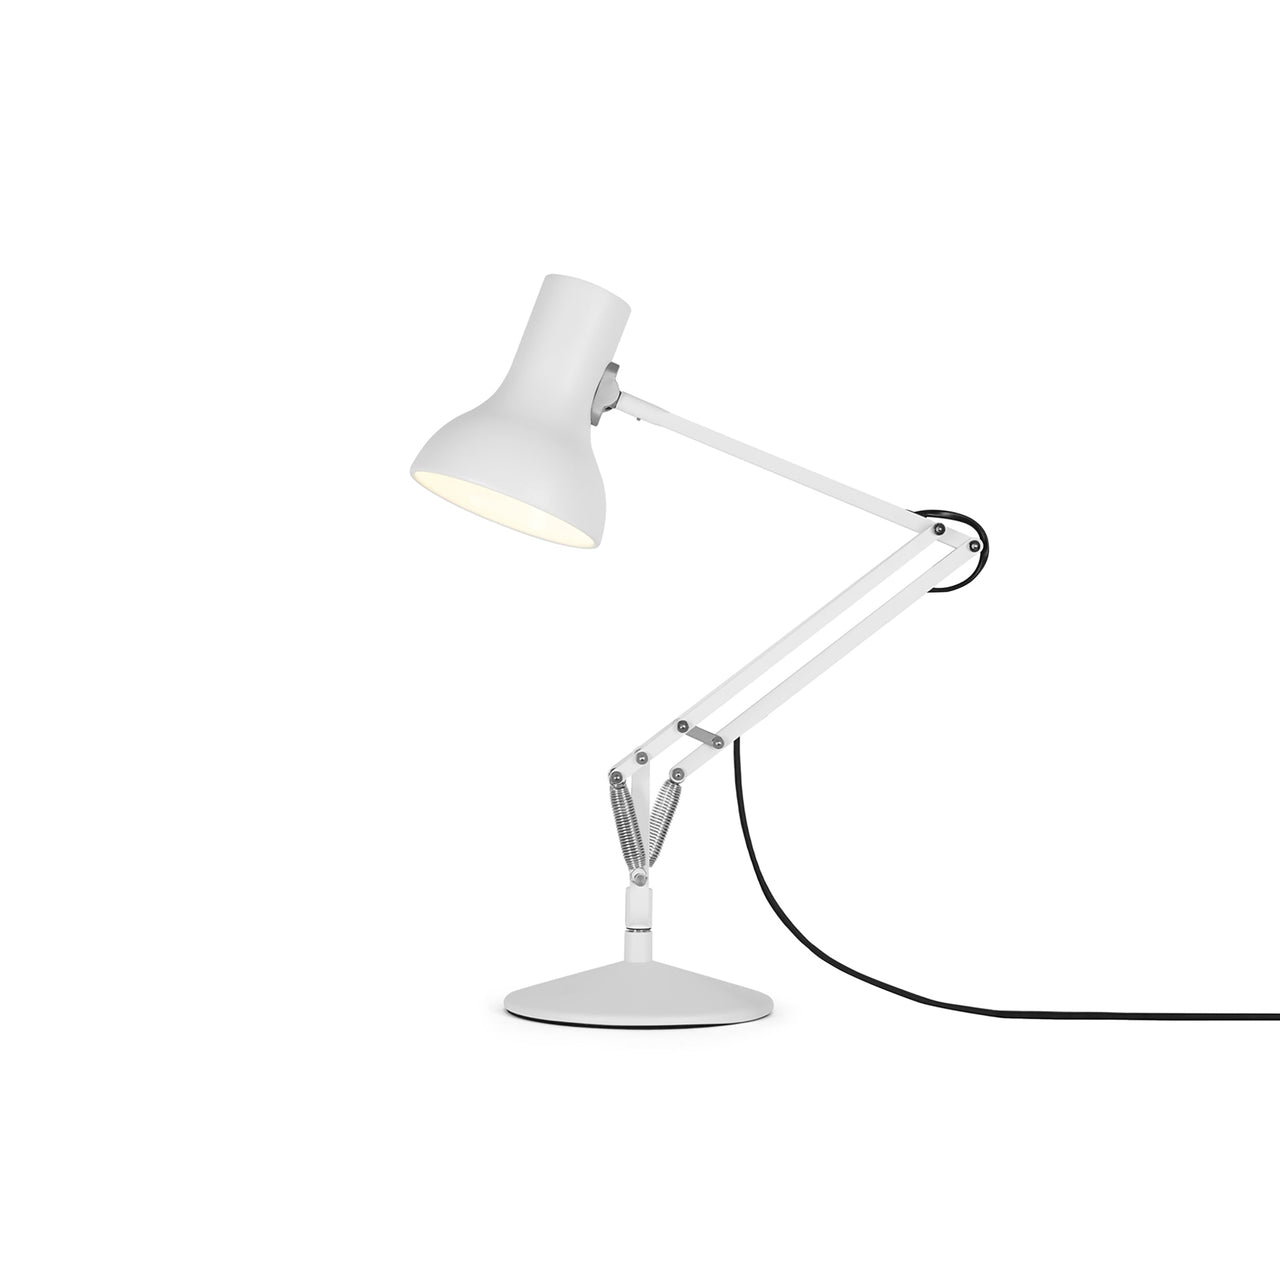 Type 75 Mini Desk Lamp | Buy Anglepoise online at A+R